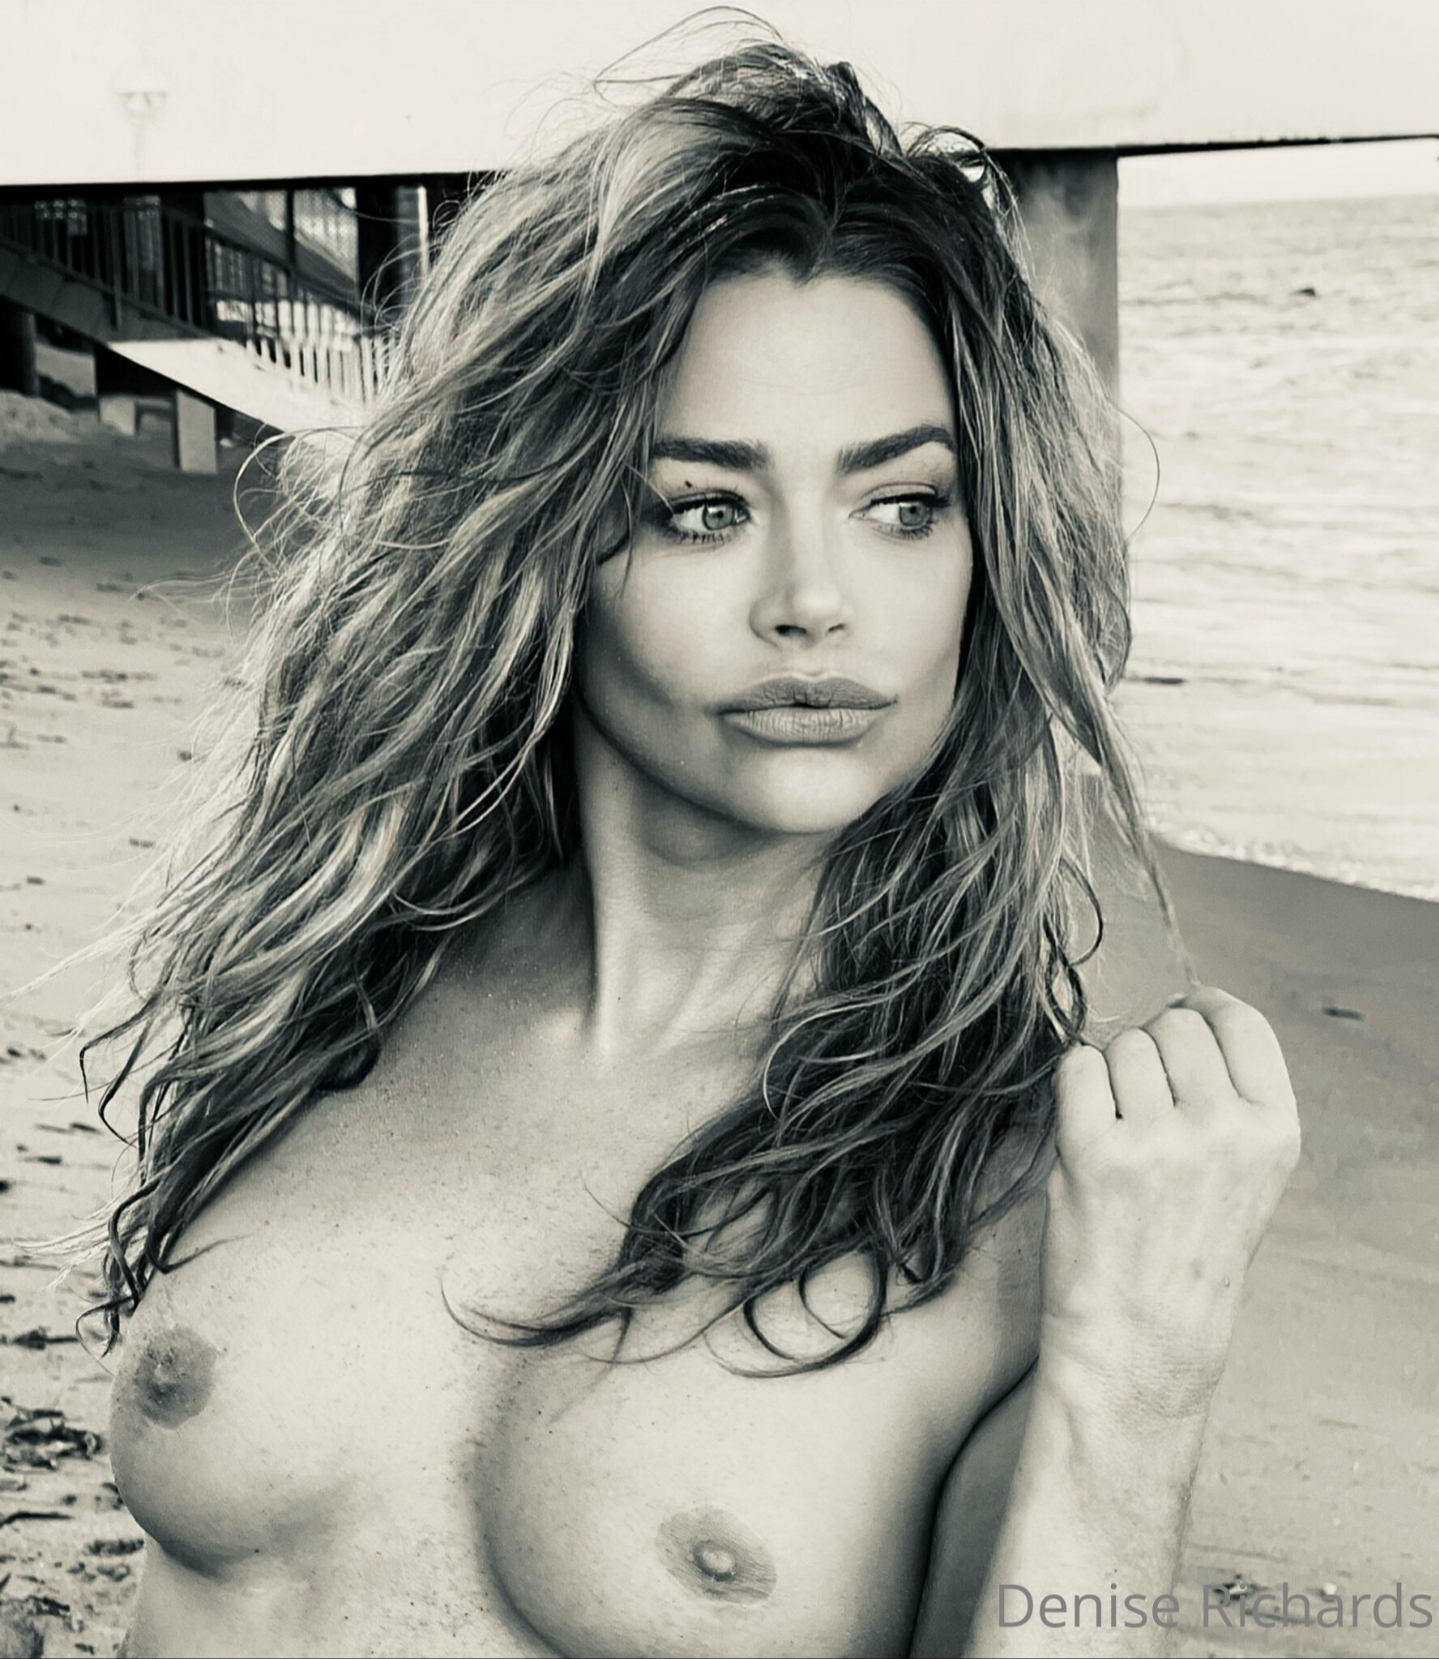 domanick robinson recommends Denise Richards Naked Photos